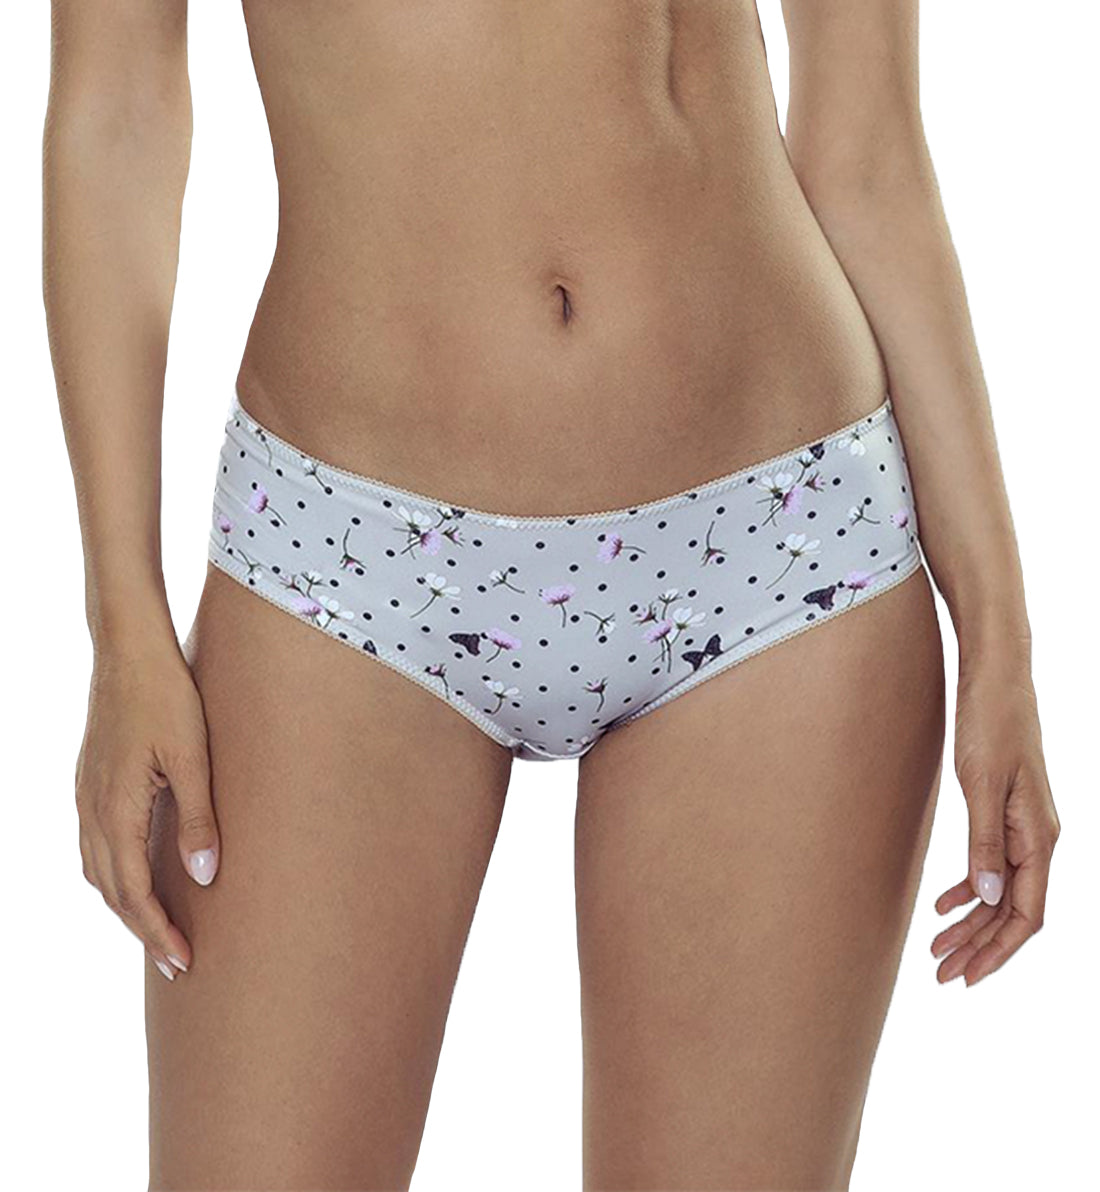 Comexim Butterflies Matching Shorty (CMBUTTERMS),Small,Grey Dot - Grey Dot,Small